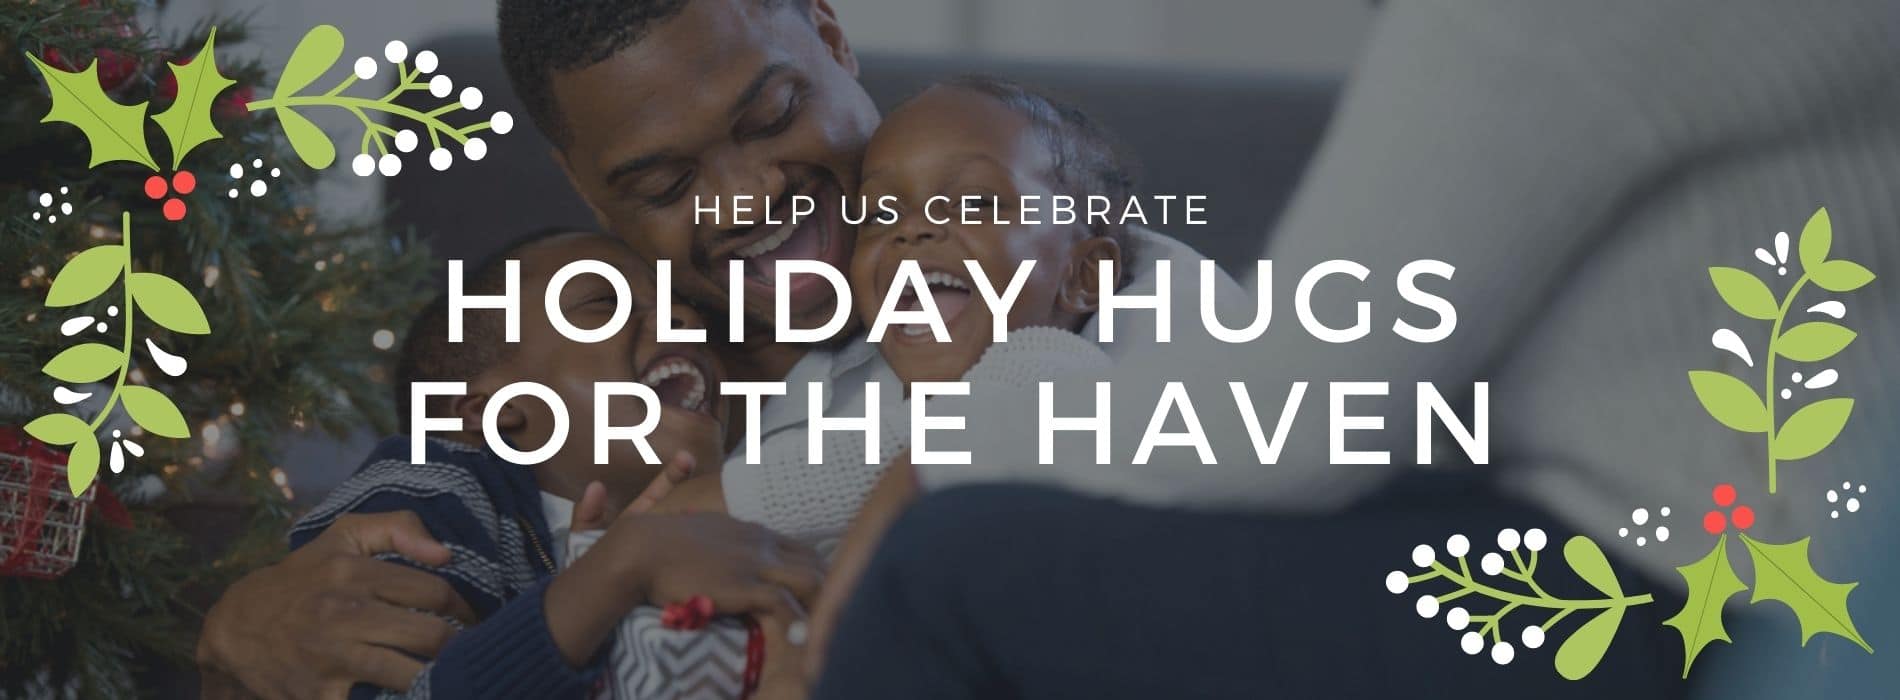 Holiday Hugs for the Haven 1